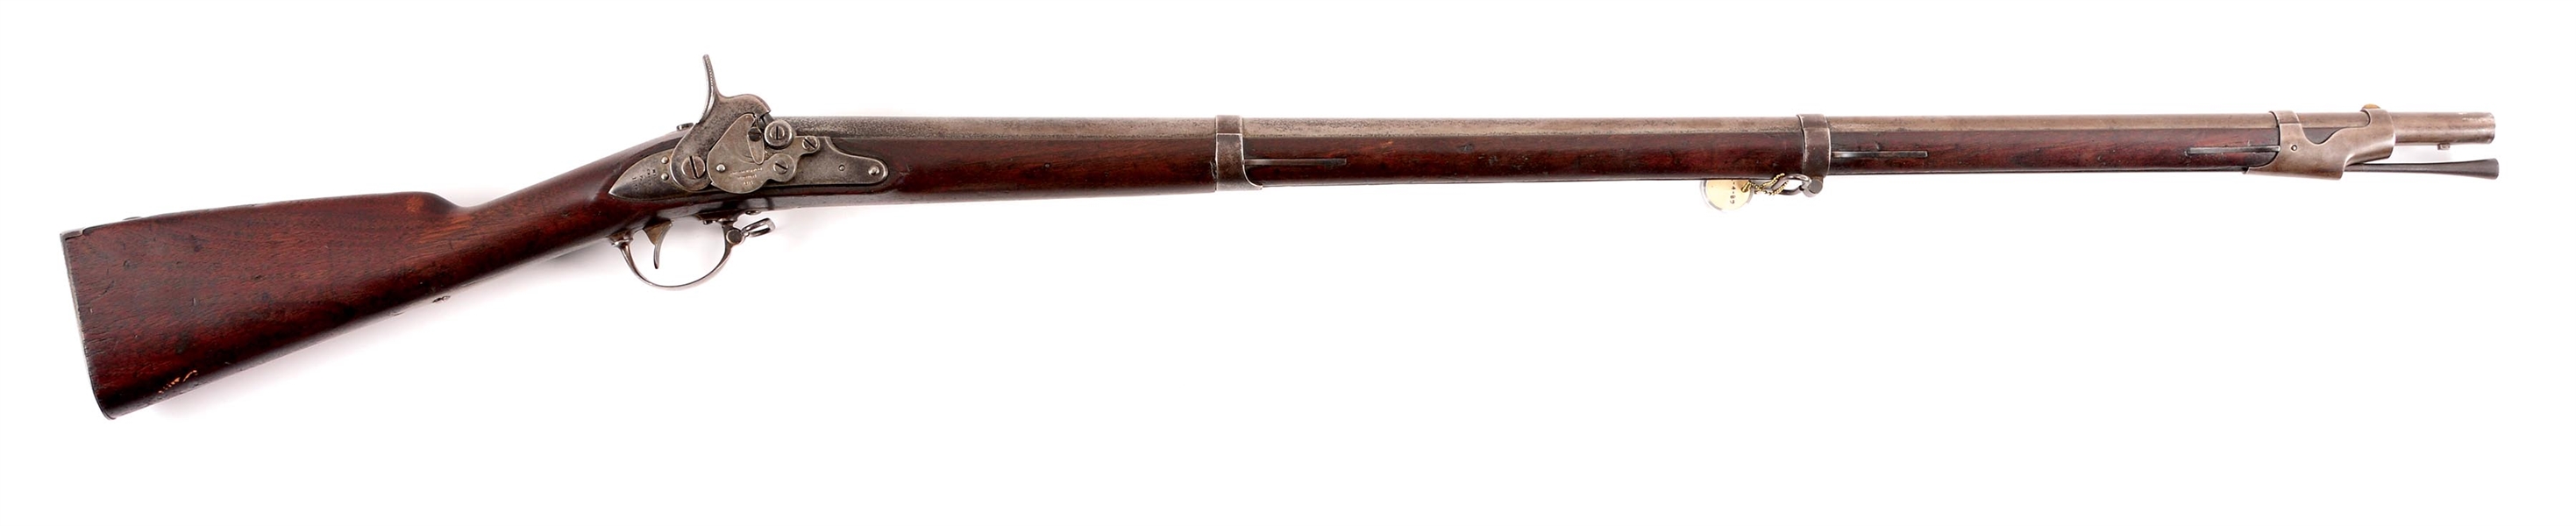 (A) SCARCE NIPPES CONTRACT MAYNARD ALTERATION PERCUSSION MUSKET. 